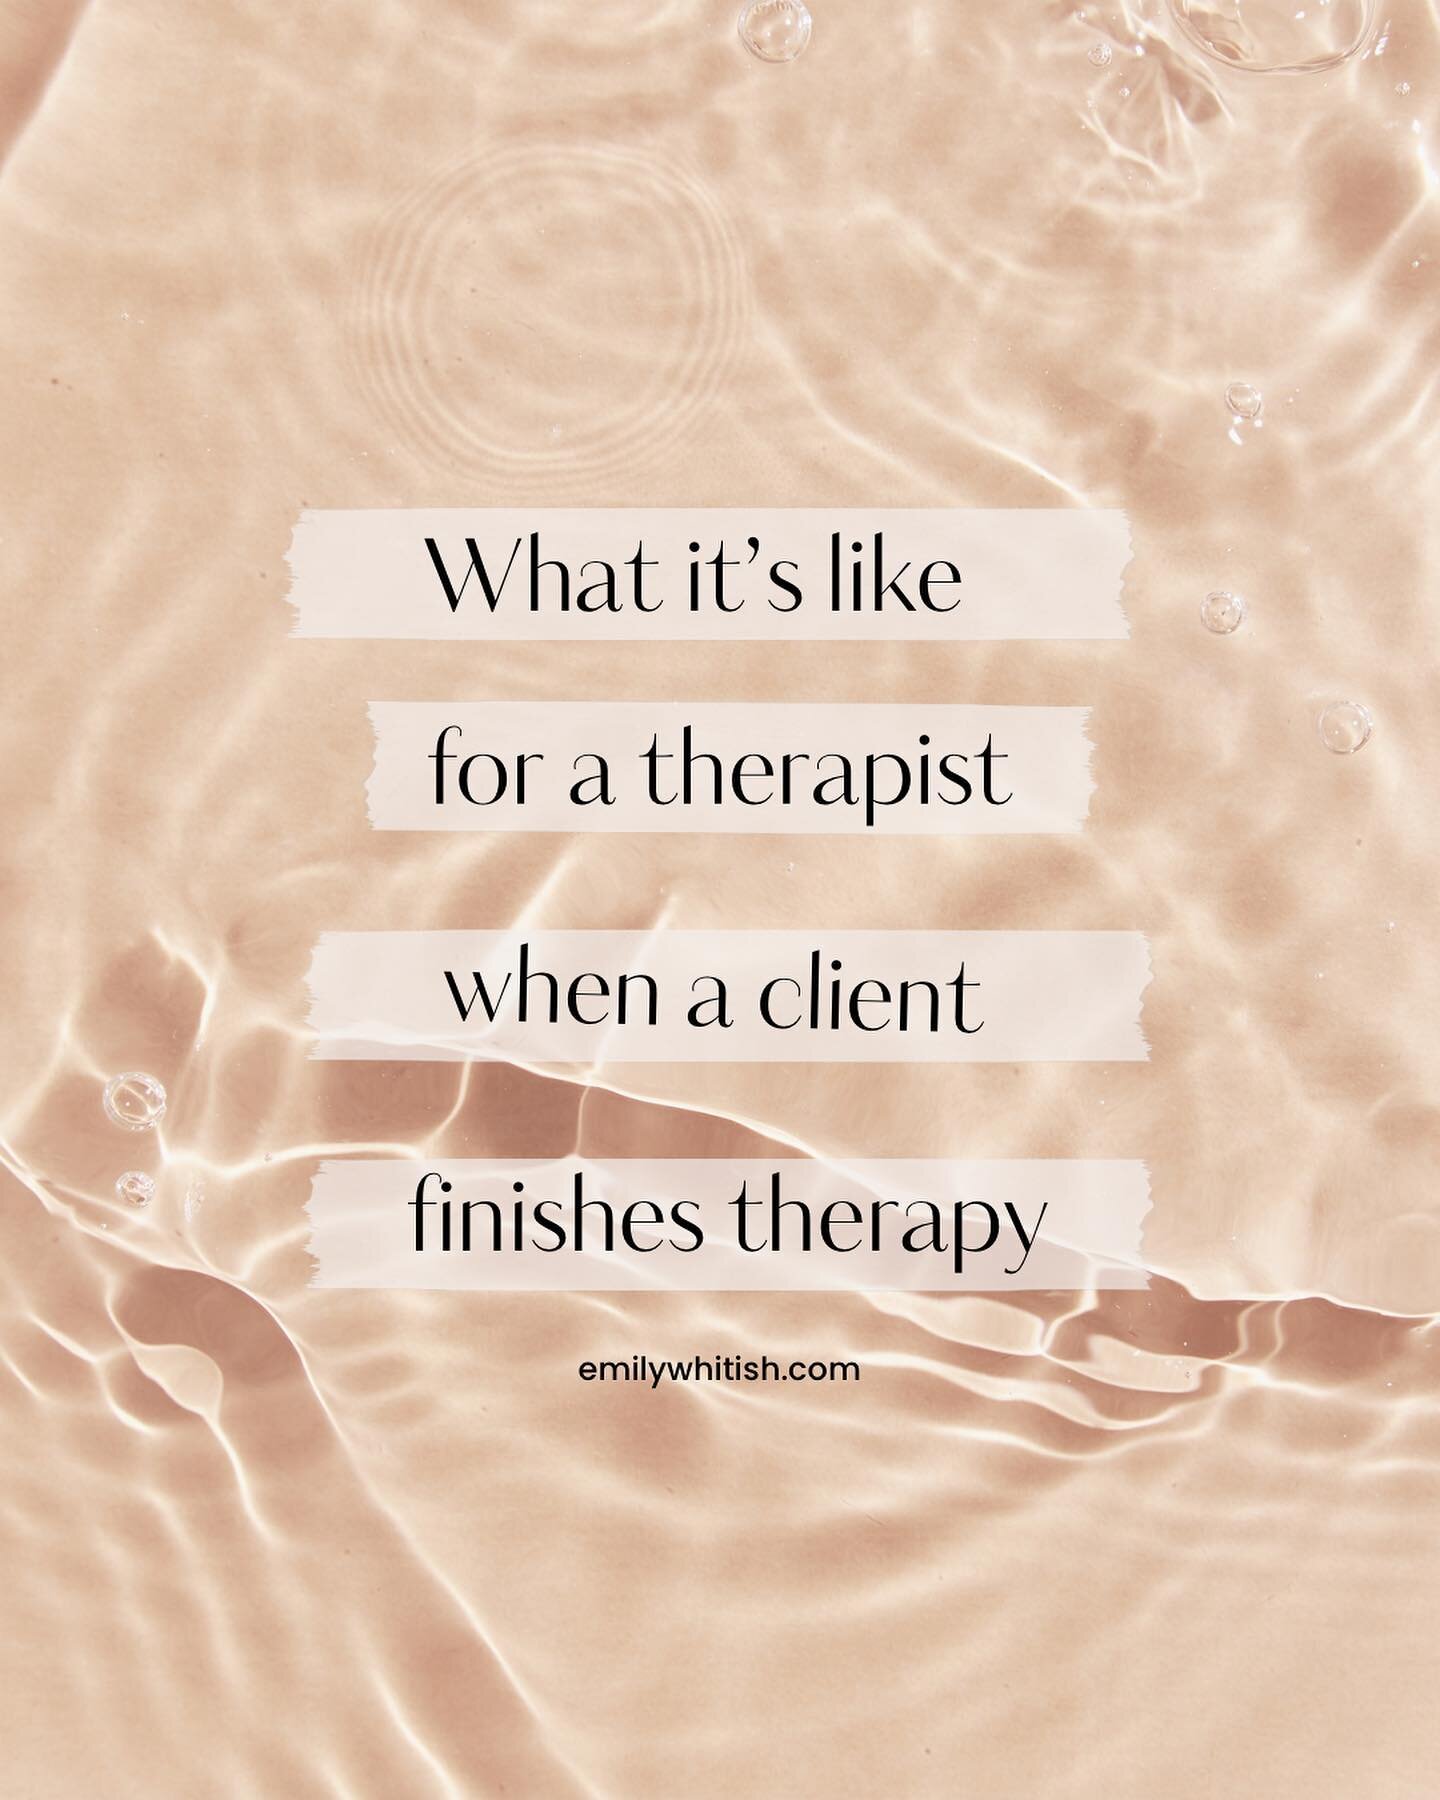 I can&rsquo;t speak for all therapists or our experience with all clients, but therapists live everyday with two parts: 

- the human part that experiences all the emotions of a meaningful and deep relationship, and who holds clients close to our hea